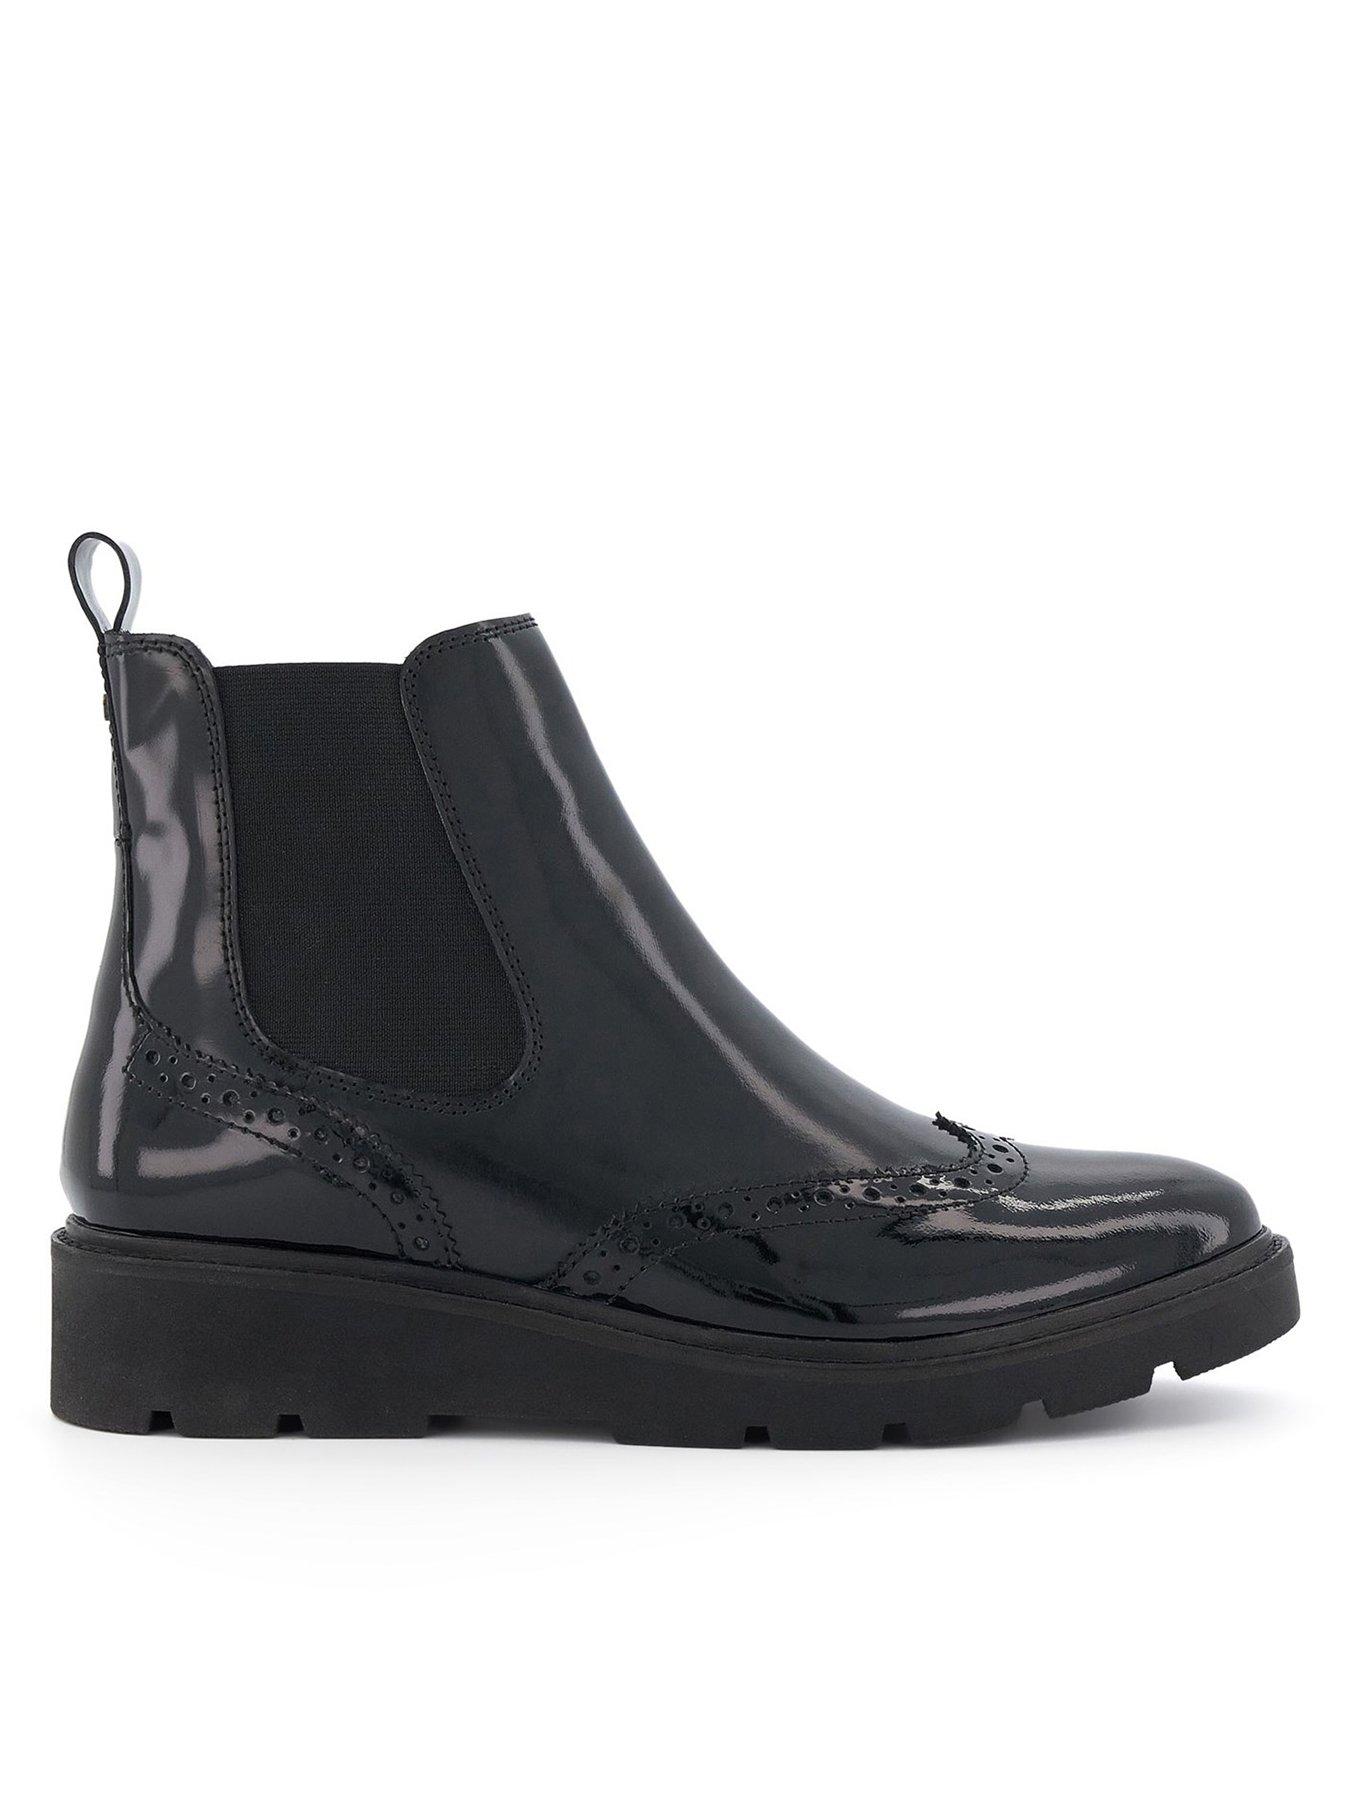 Dune London Paleo Ankle Boots - Black | very.co.uk